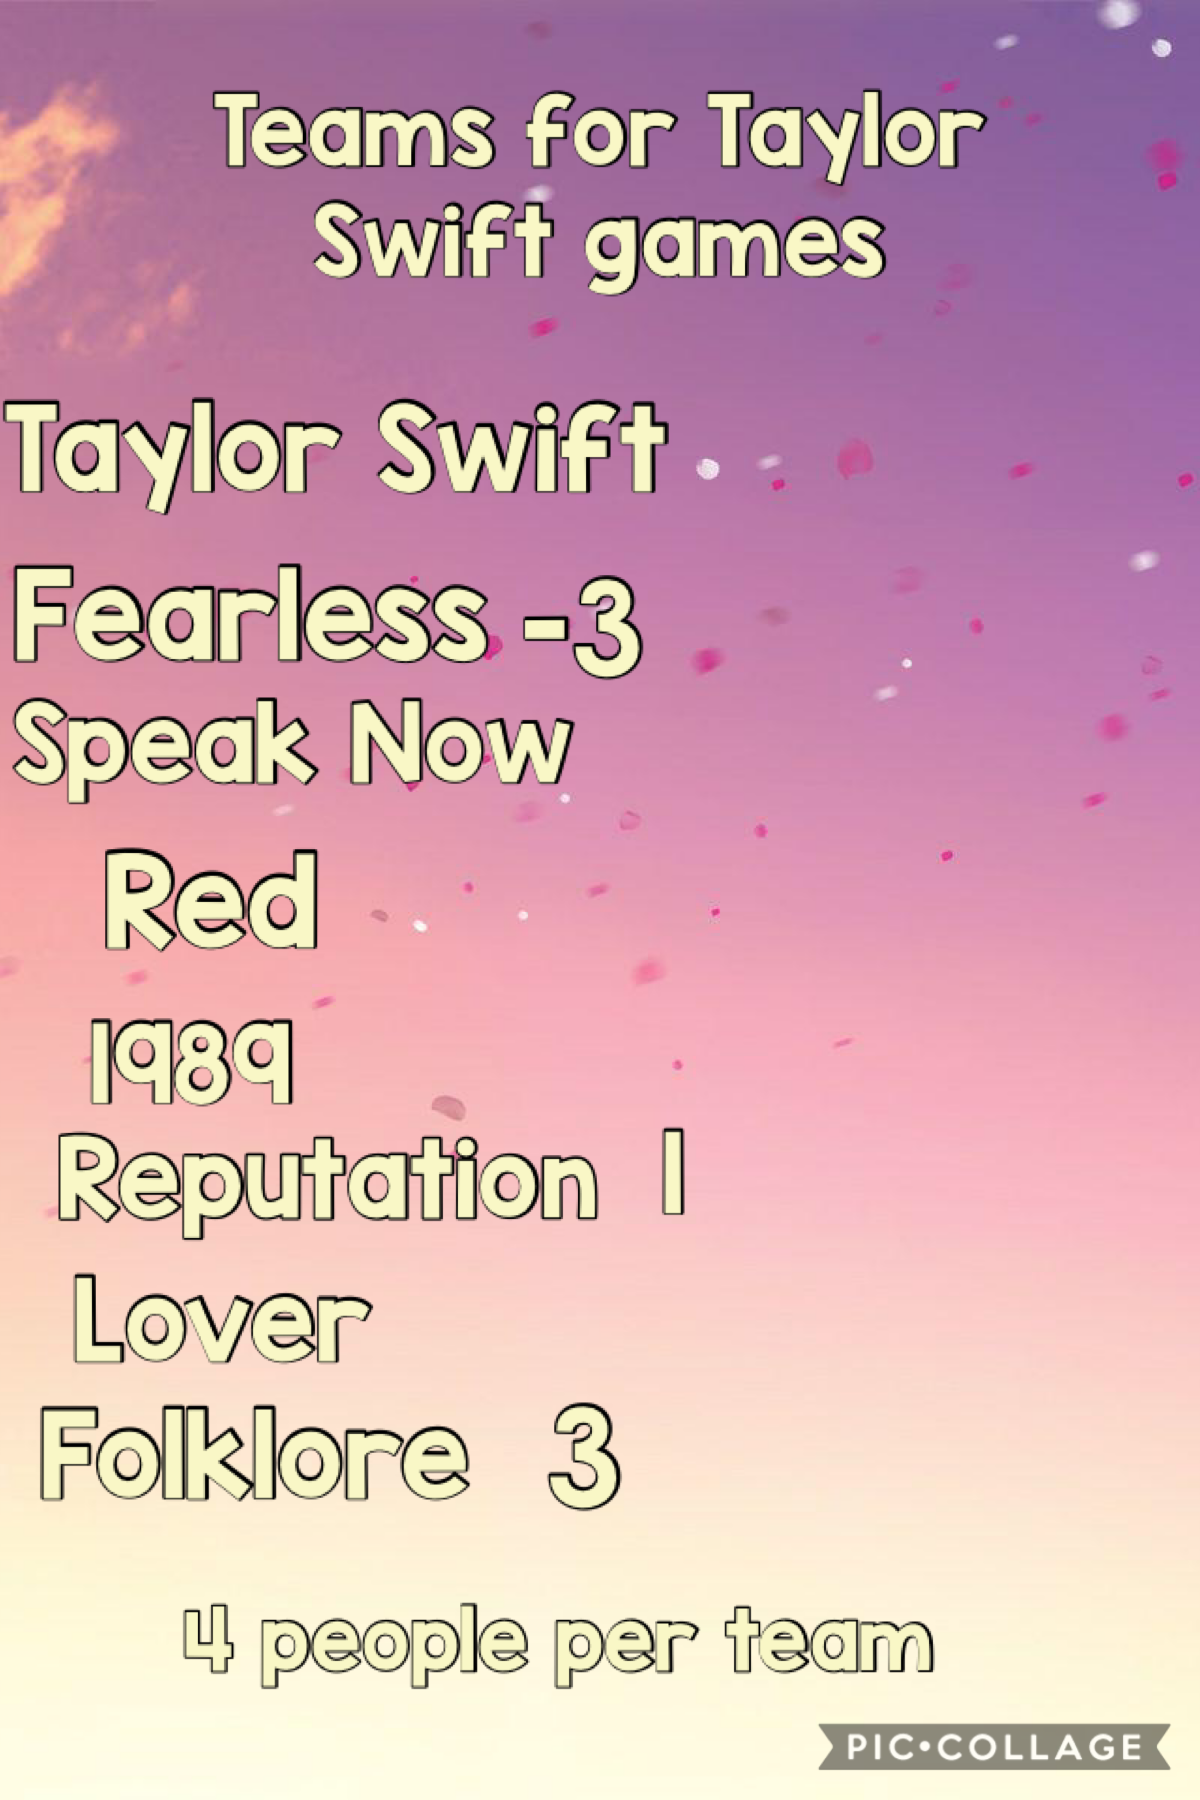 Team update for the Taylor Swift games